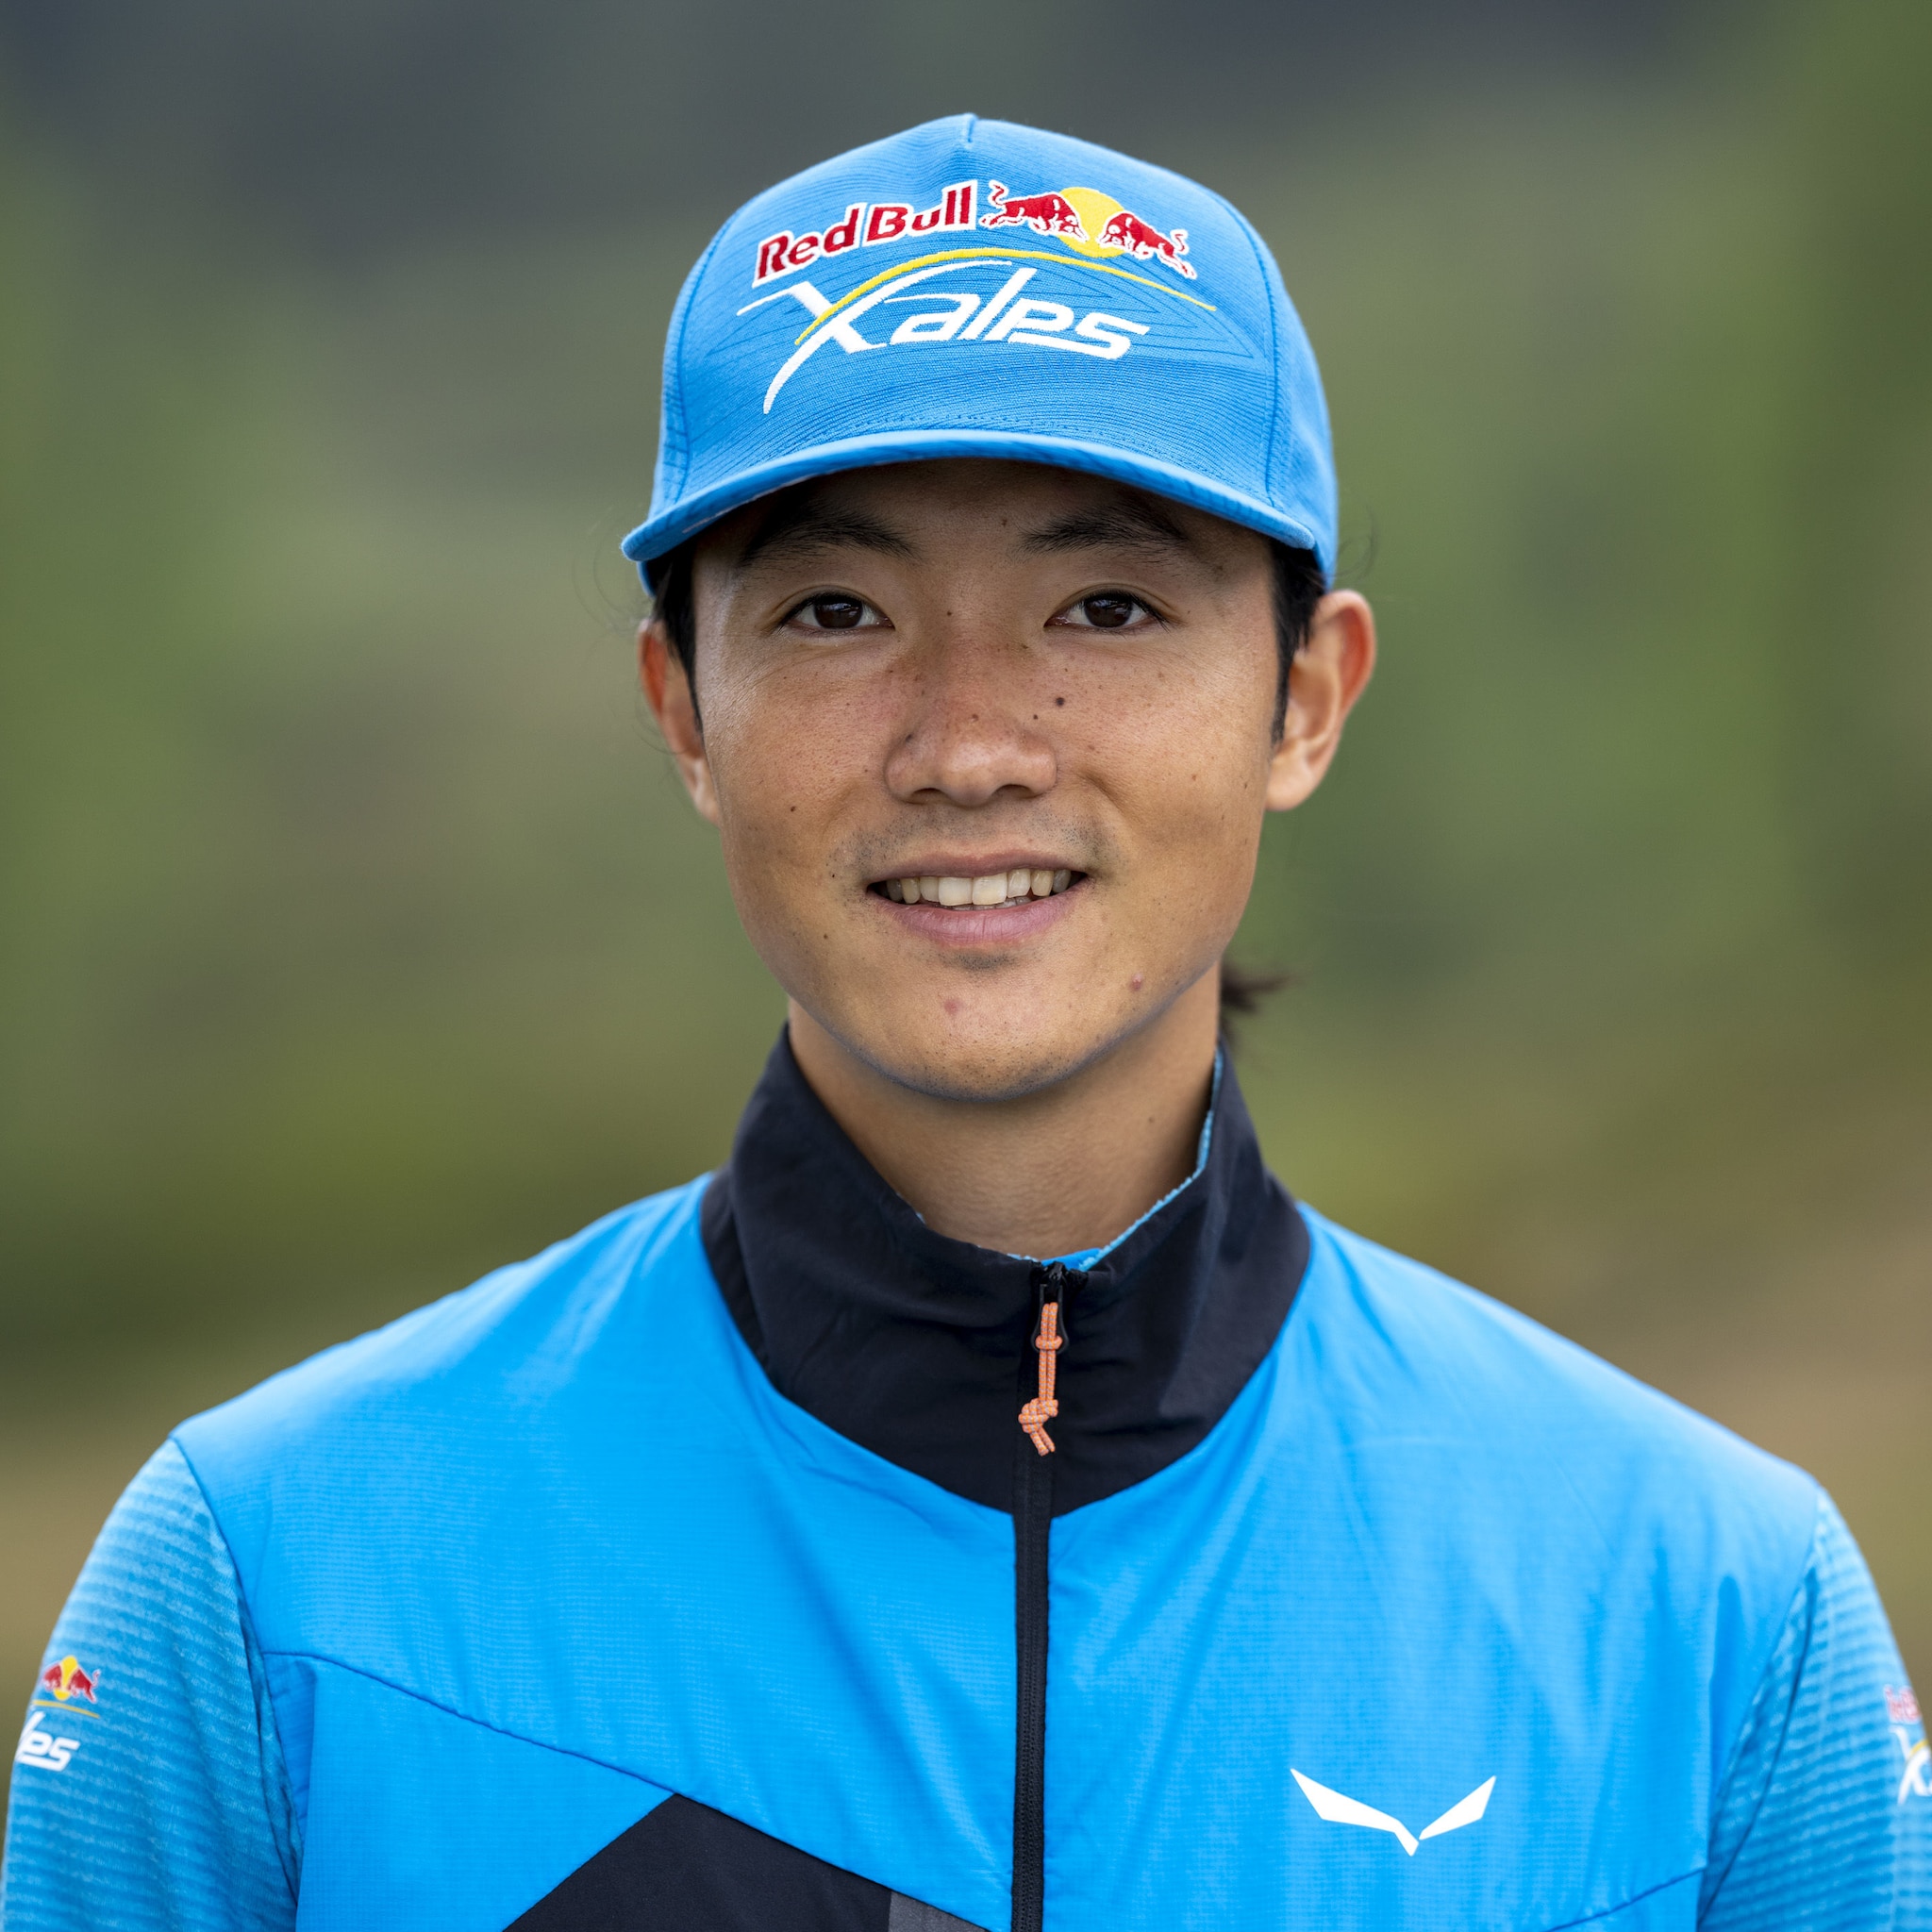 JPN2 poses for a portrait during the Red Bull X-Alps pre-shooting in Kleinarl, Austria on June 13, 2021.